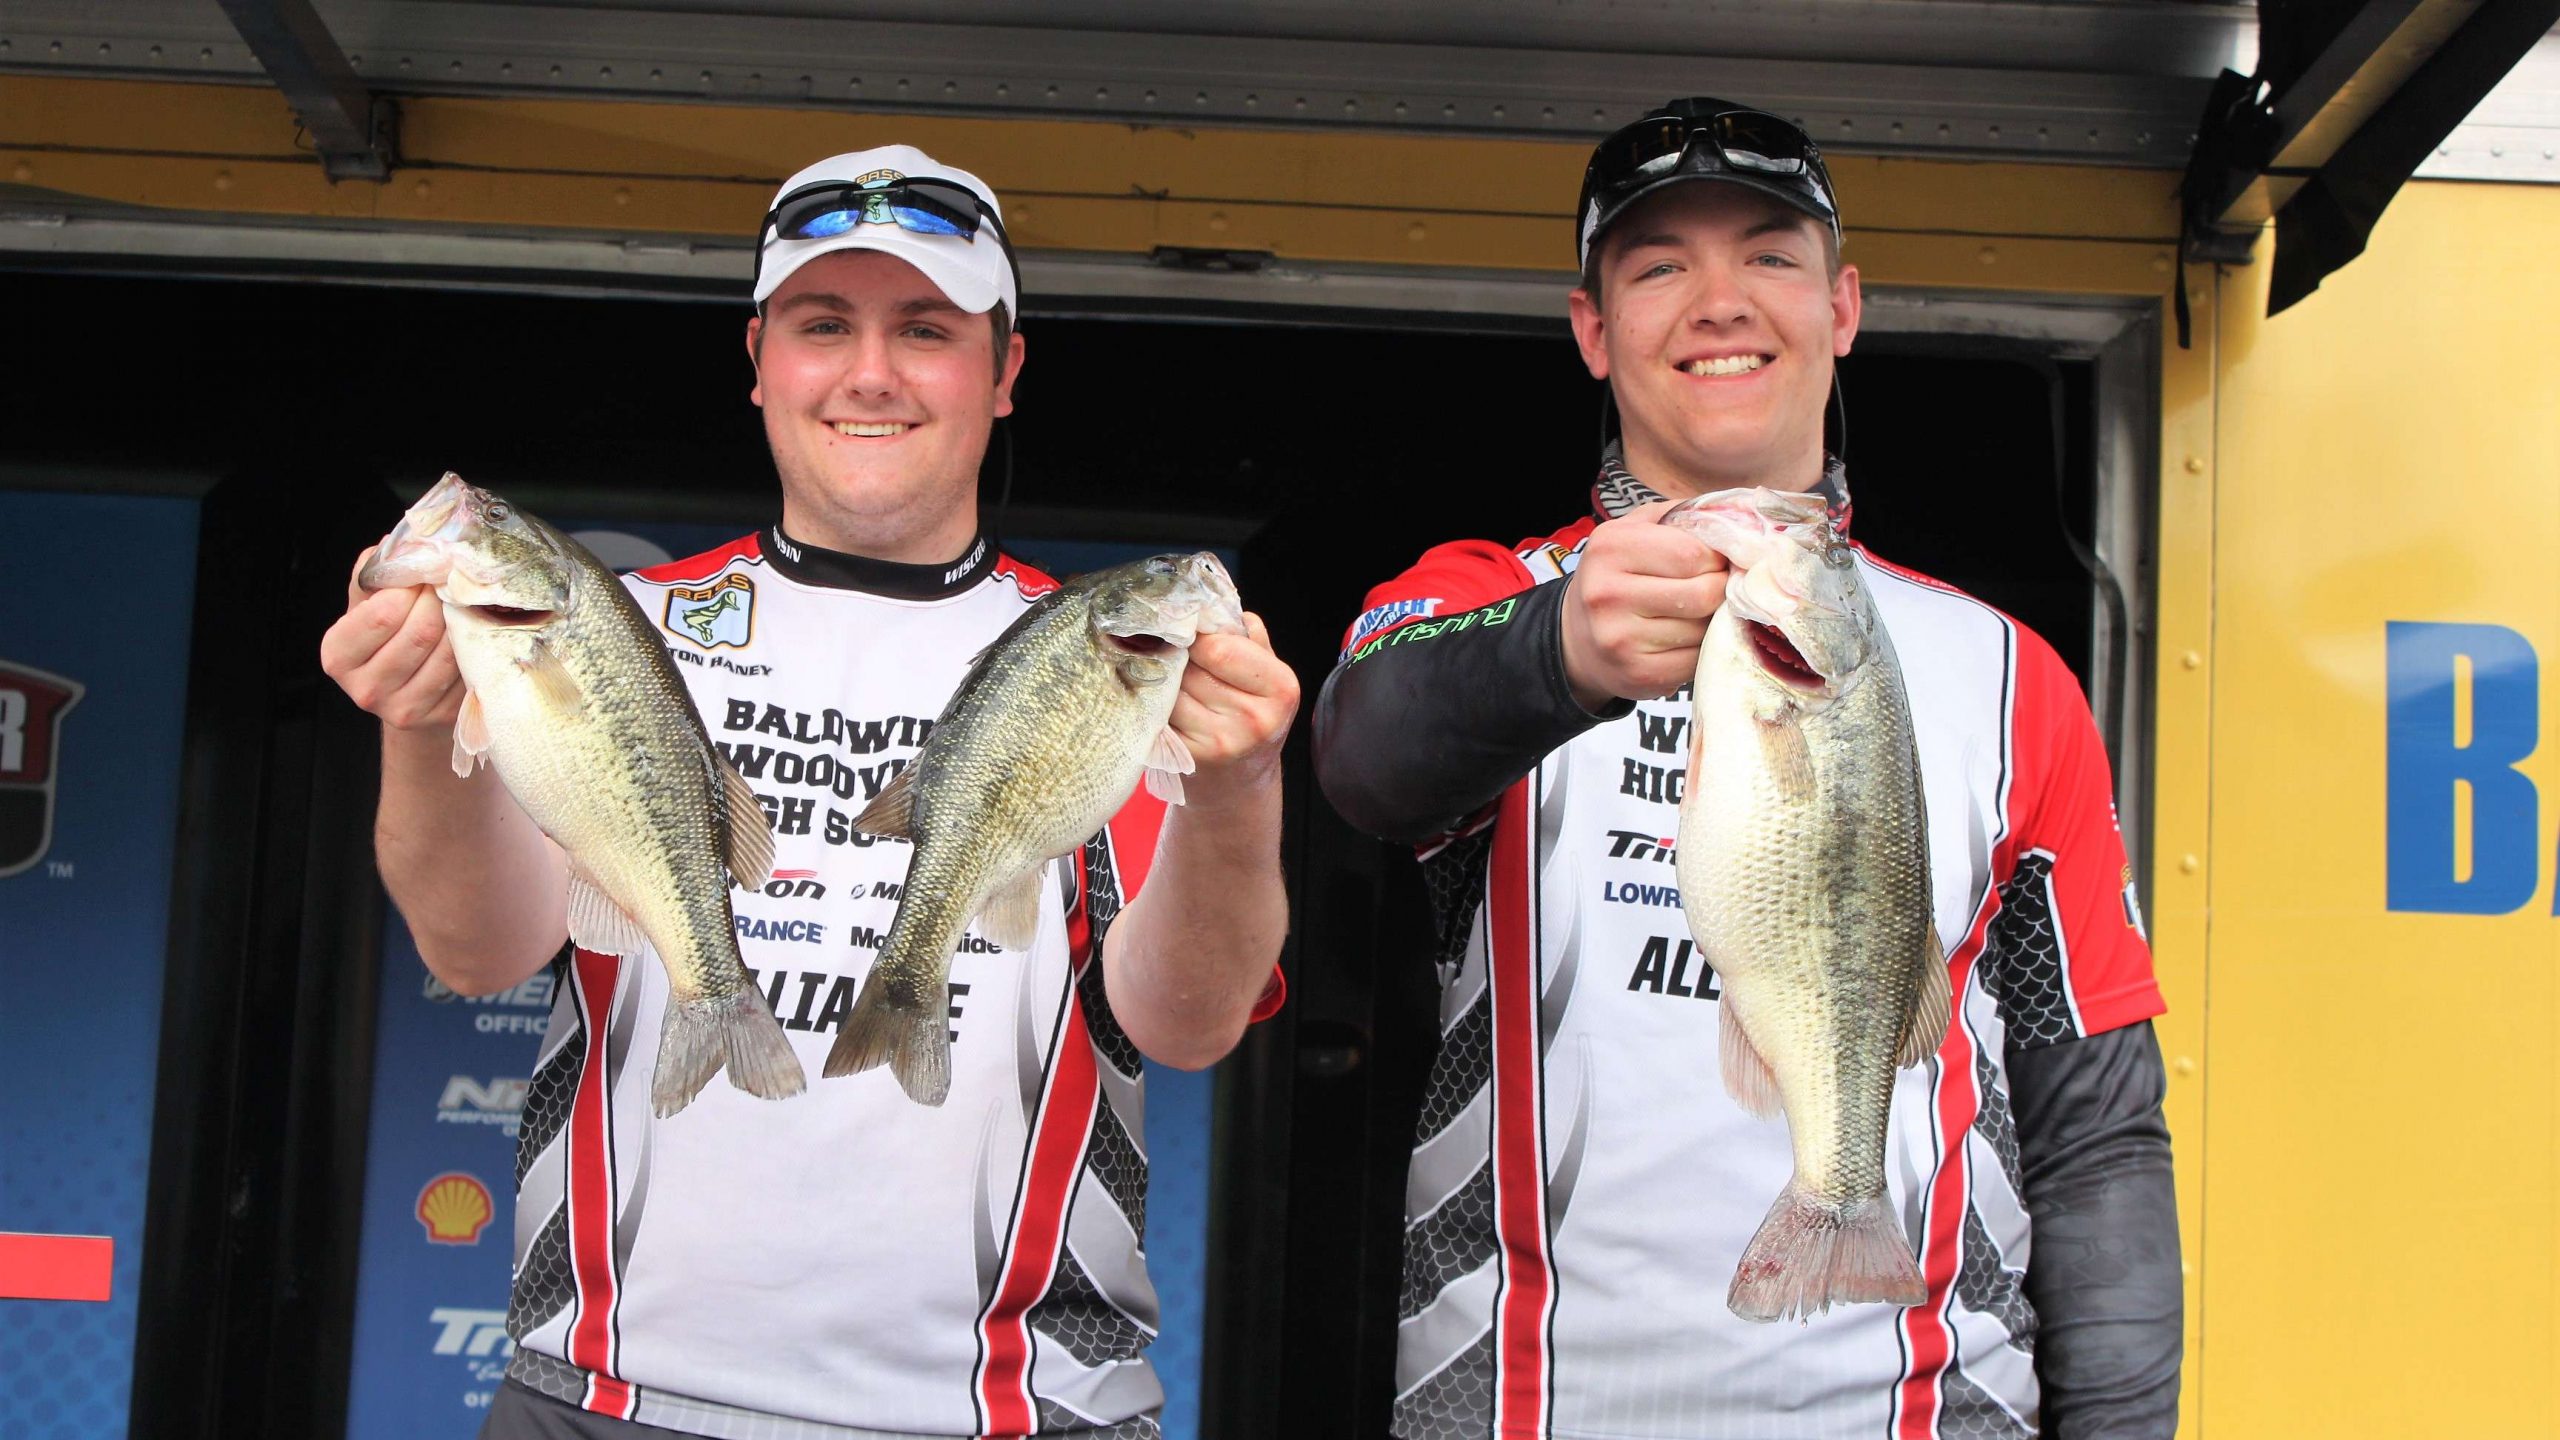 Colton Haney and Noah Lindus of Wisconsin's BW Bassers placed 18th overall with 8-3.